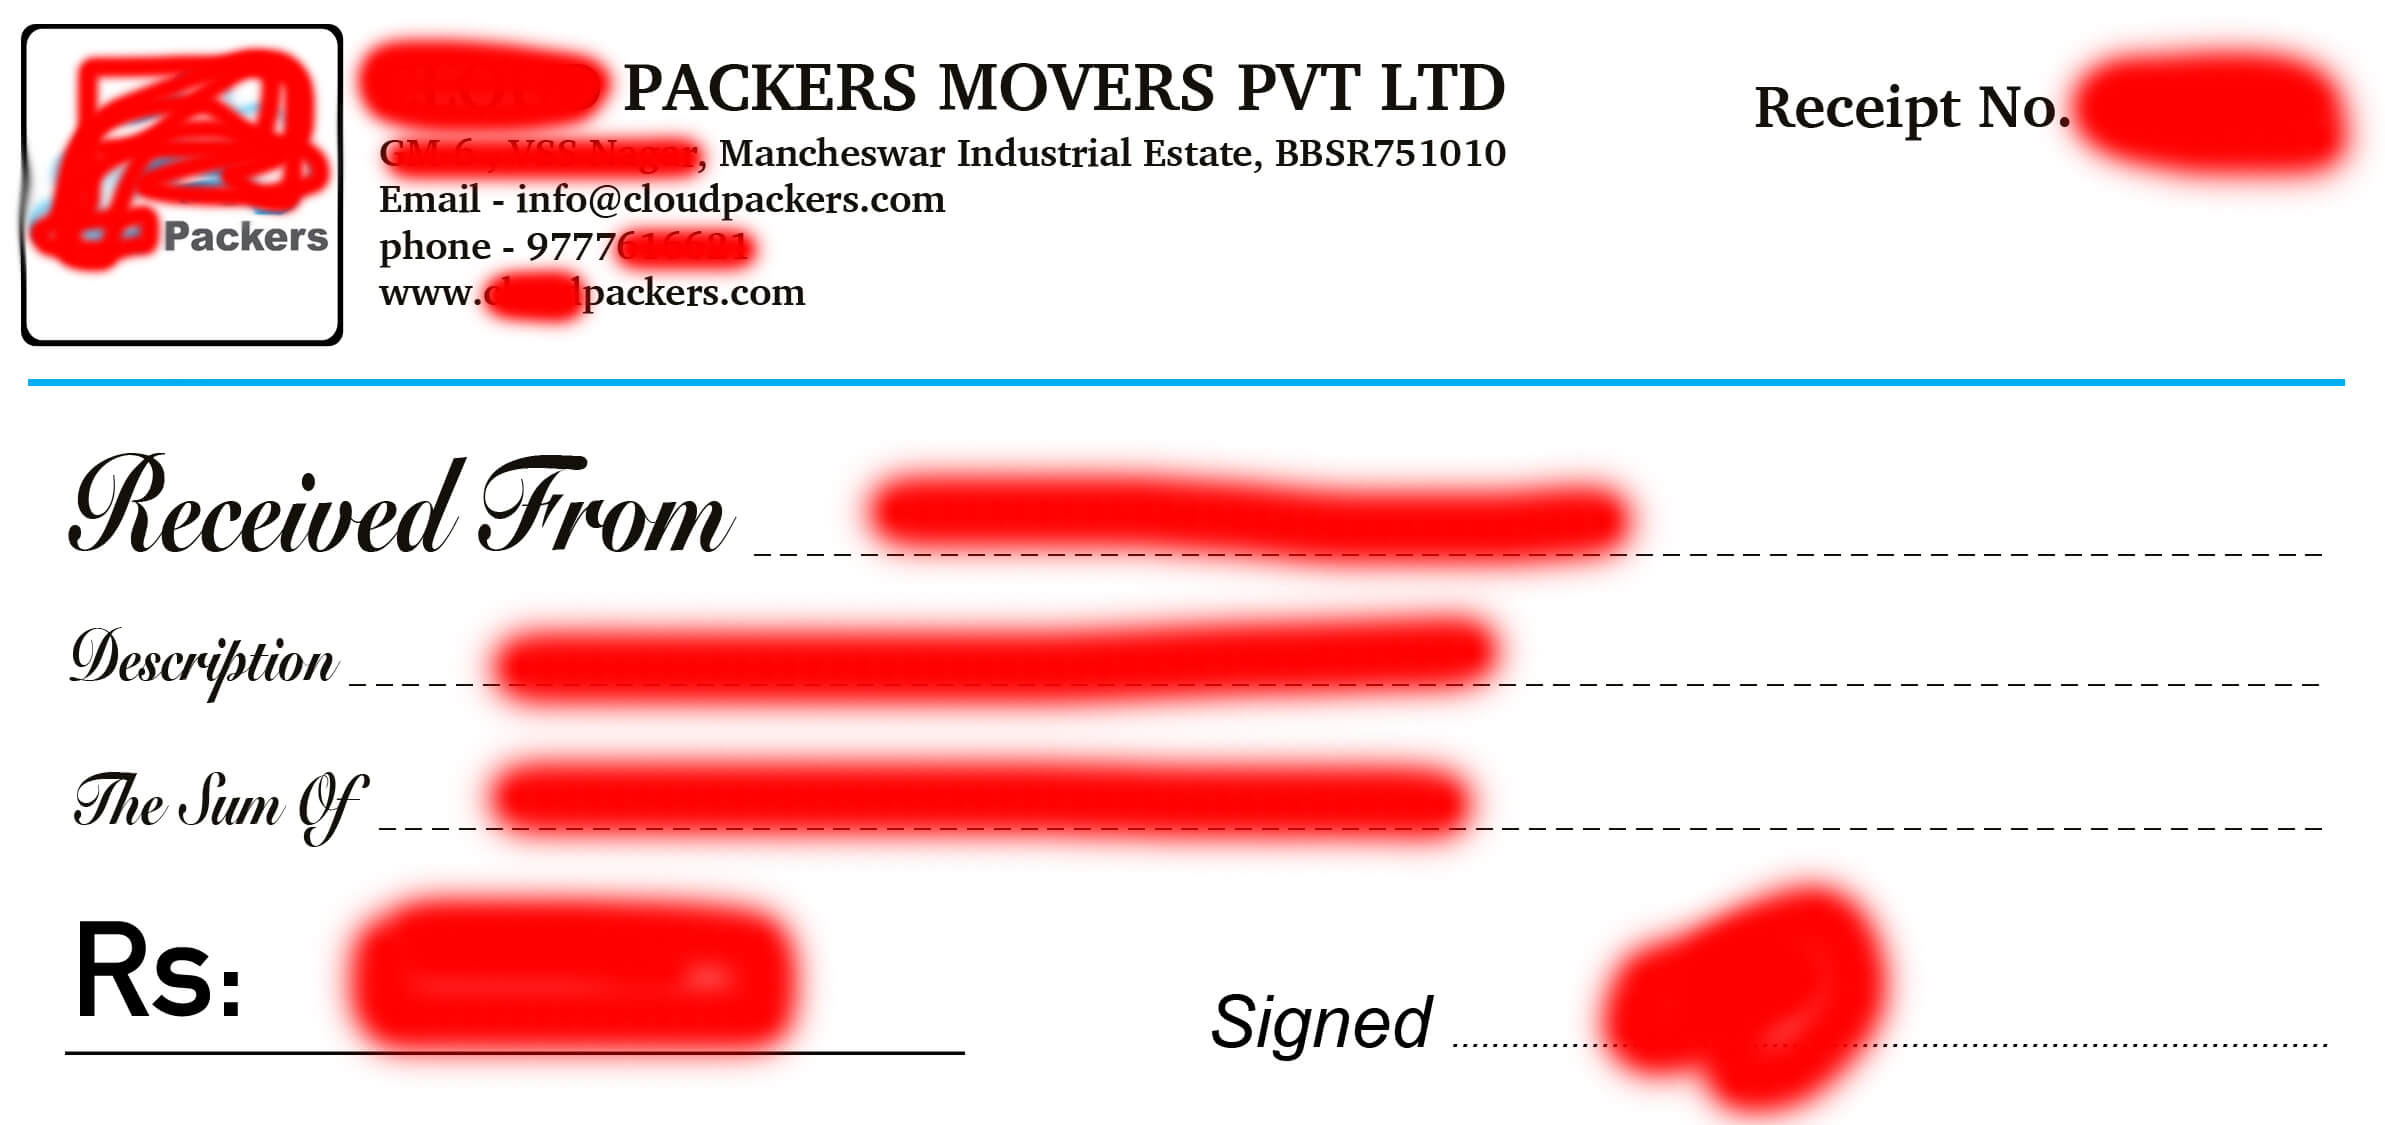 Smaple copy of packers and movers Cash Memo or Money Recipt